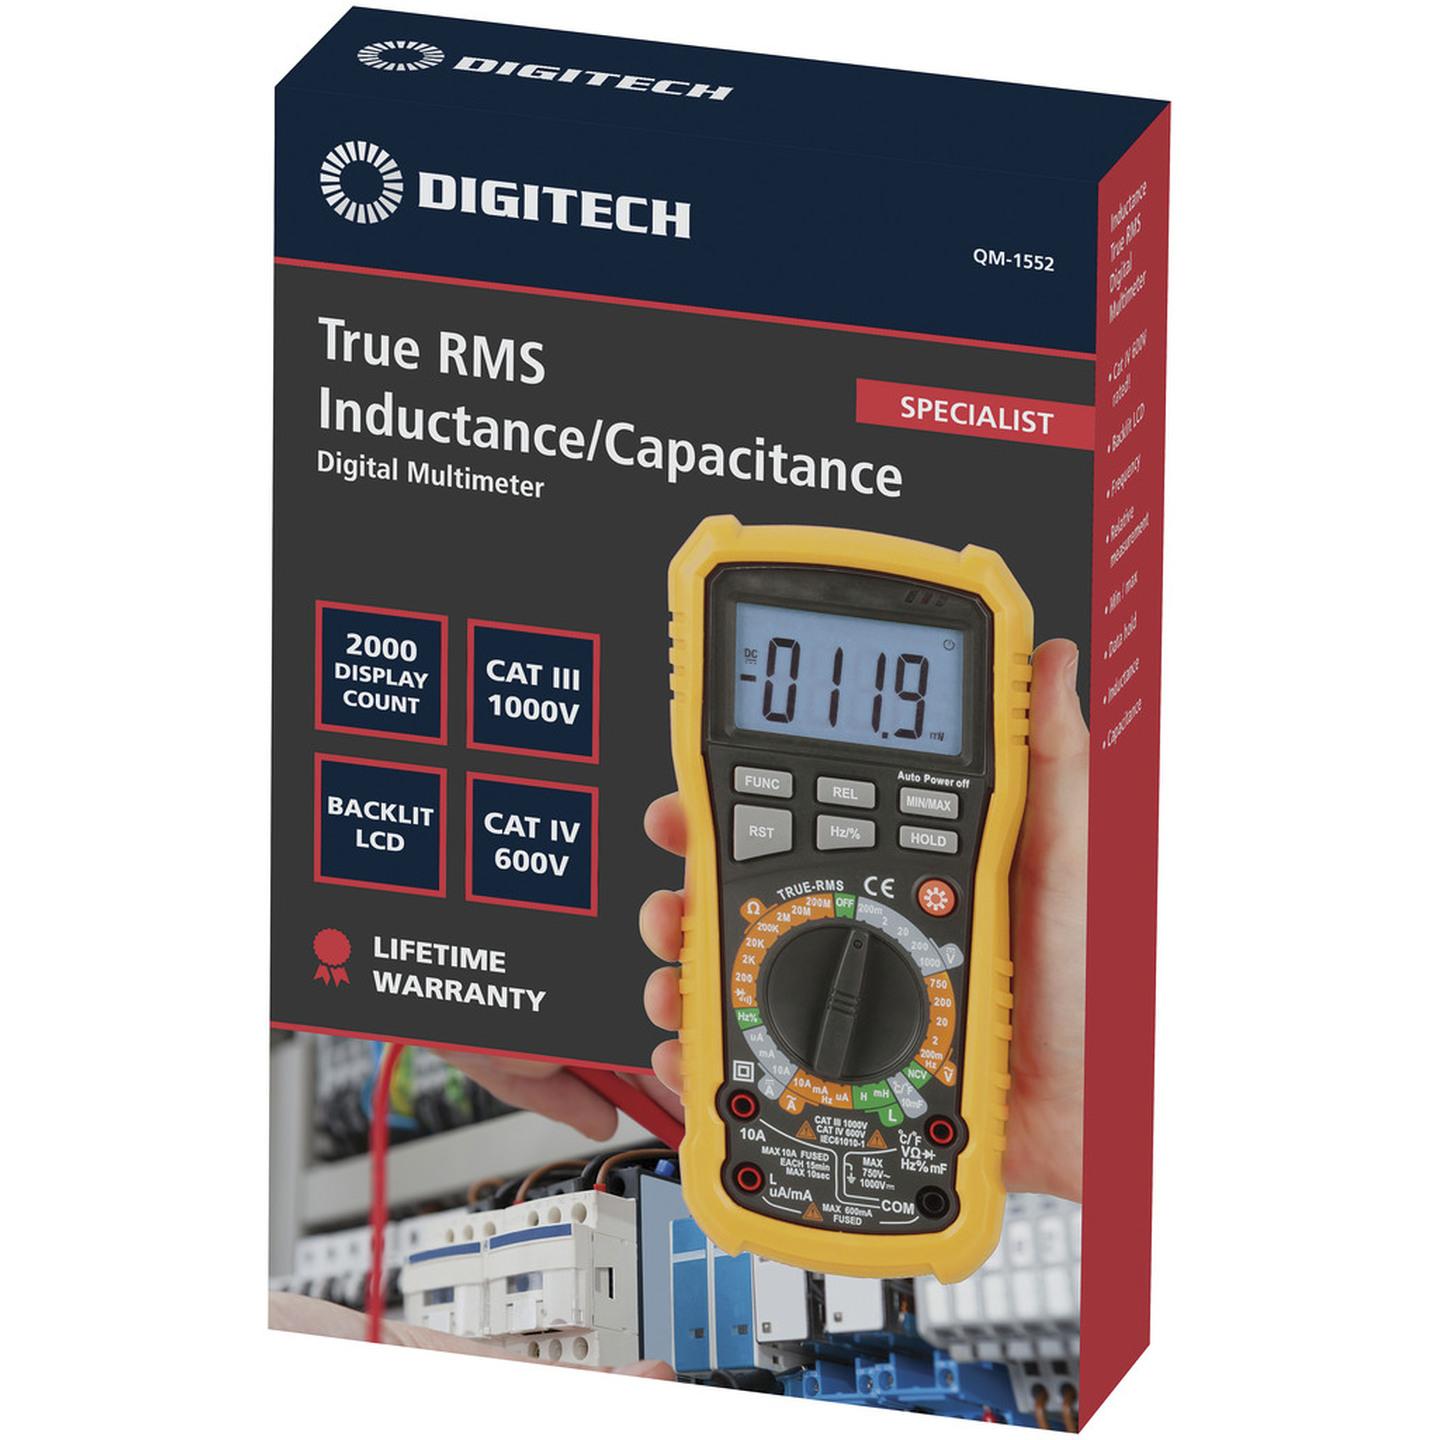 True RMS Inductance/Capacitance DMM